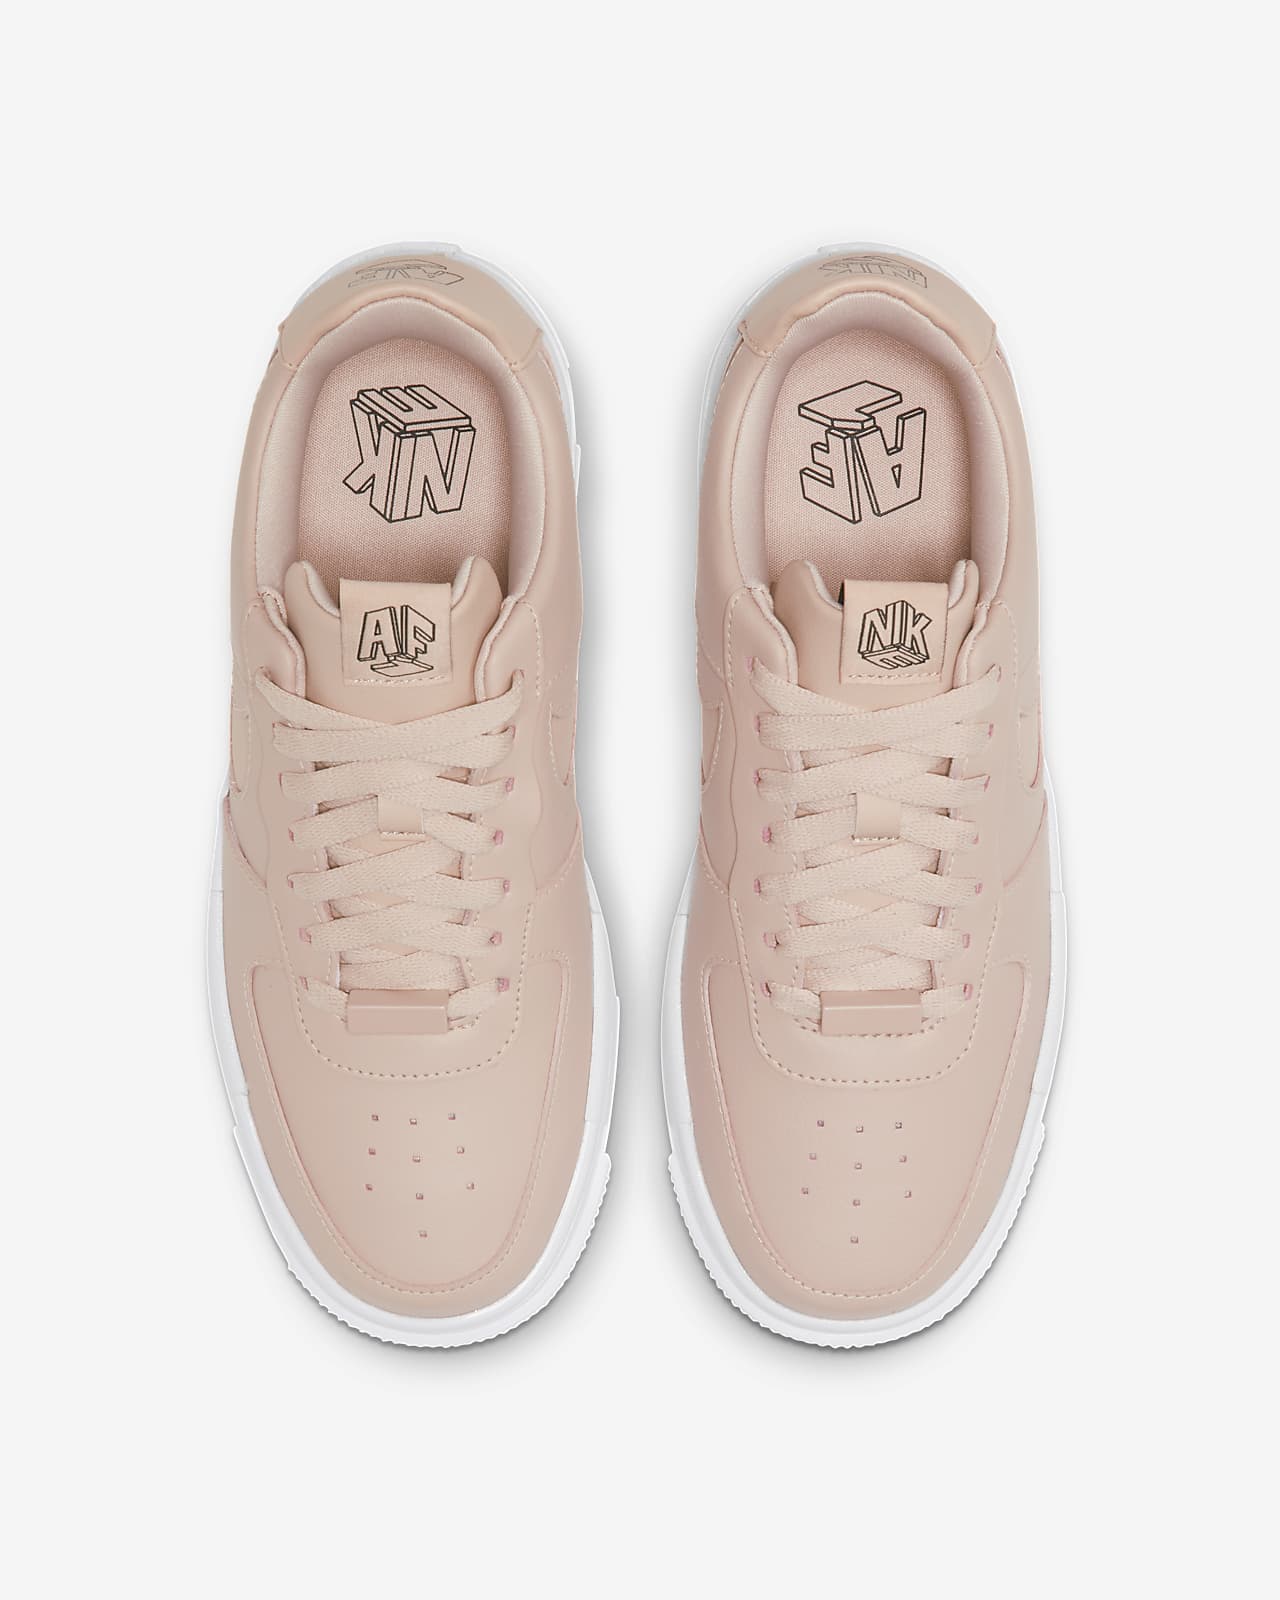 nike women's air force one shoes